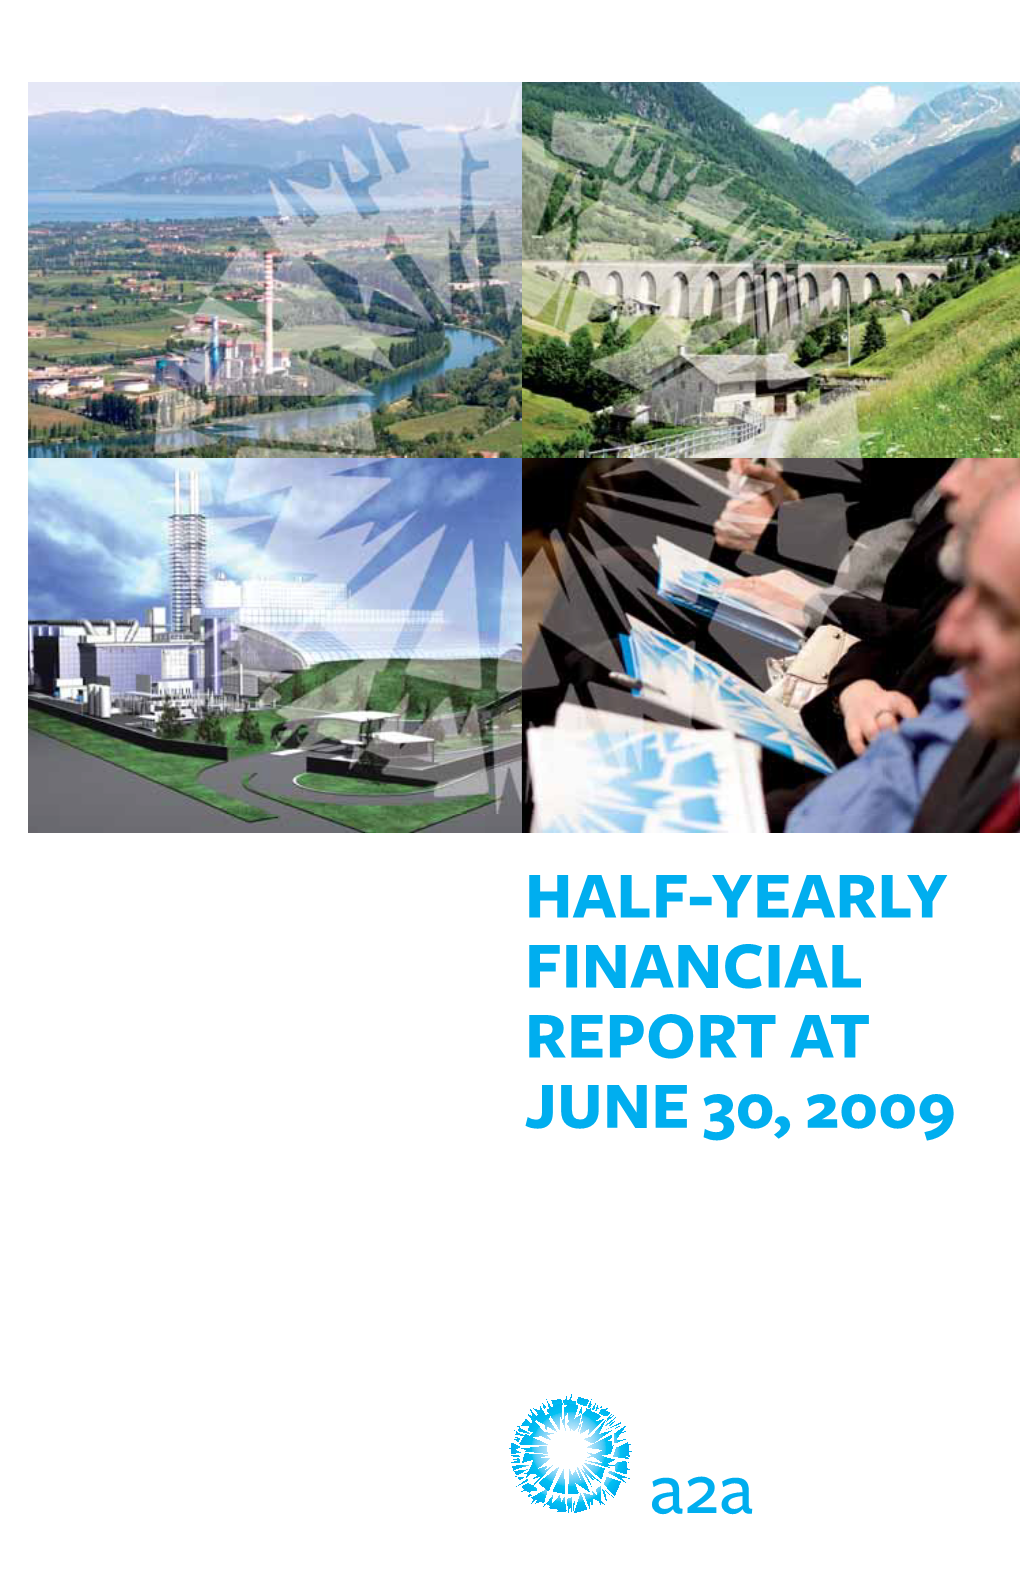 Half-Yearly Financial Report at June 30, 2009